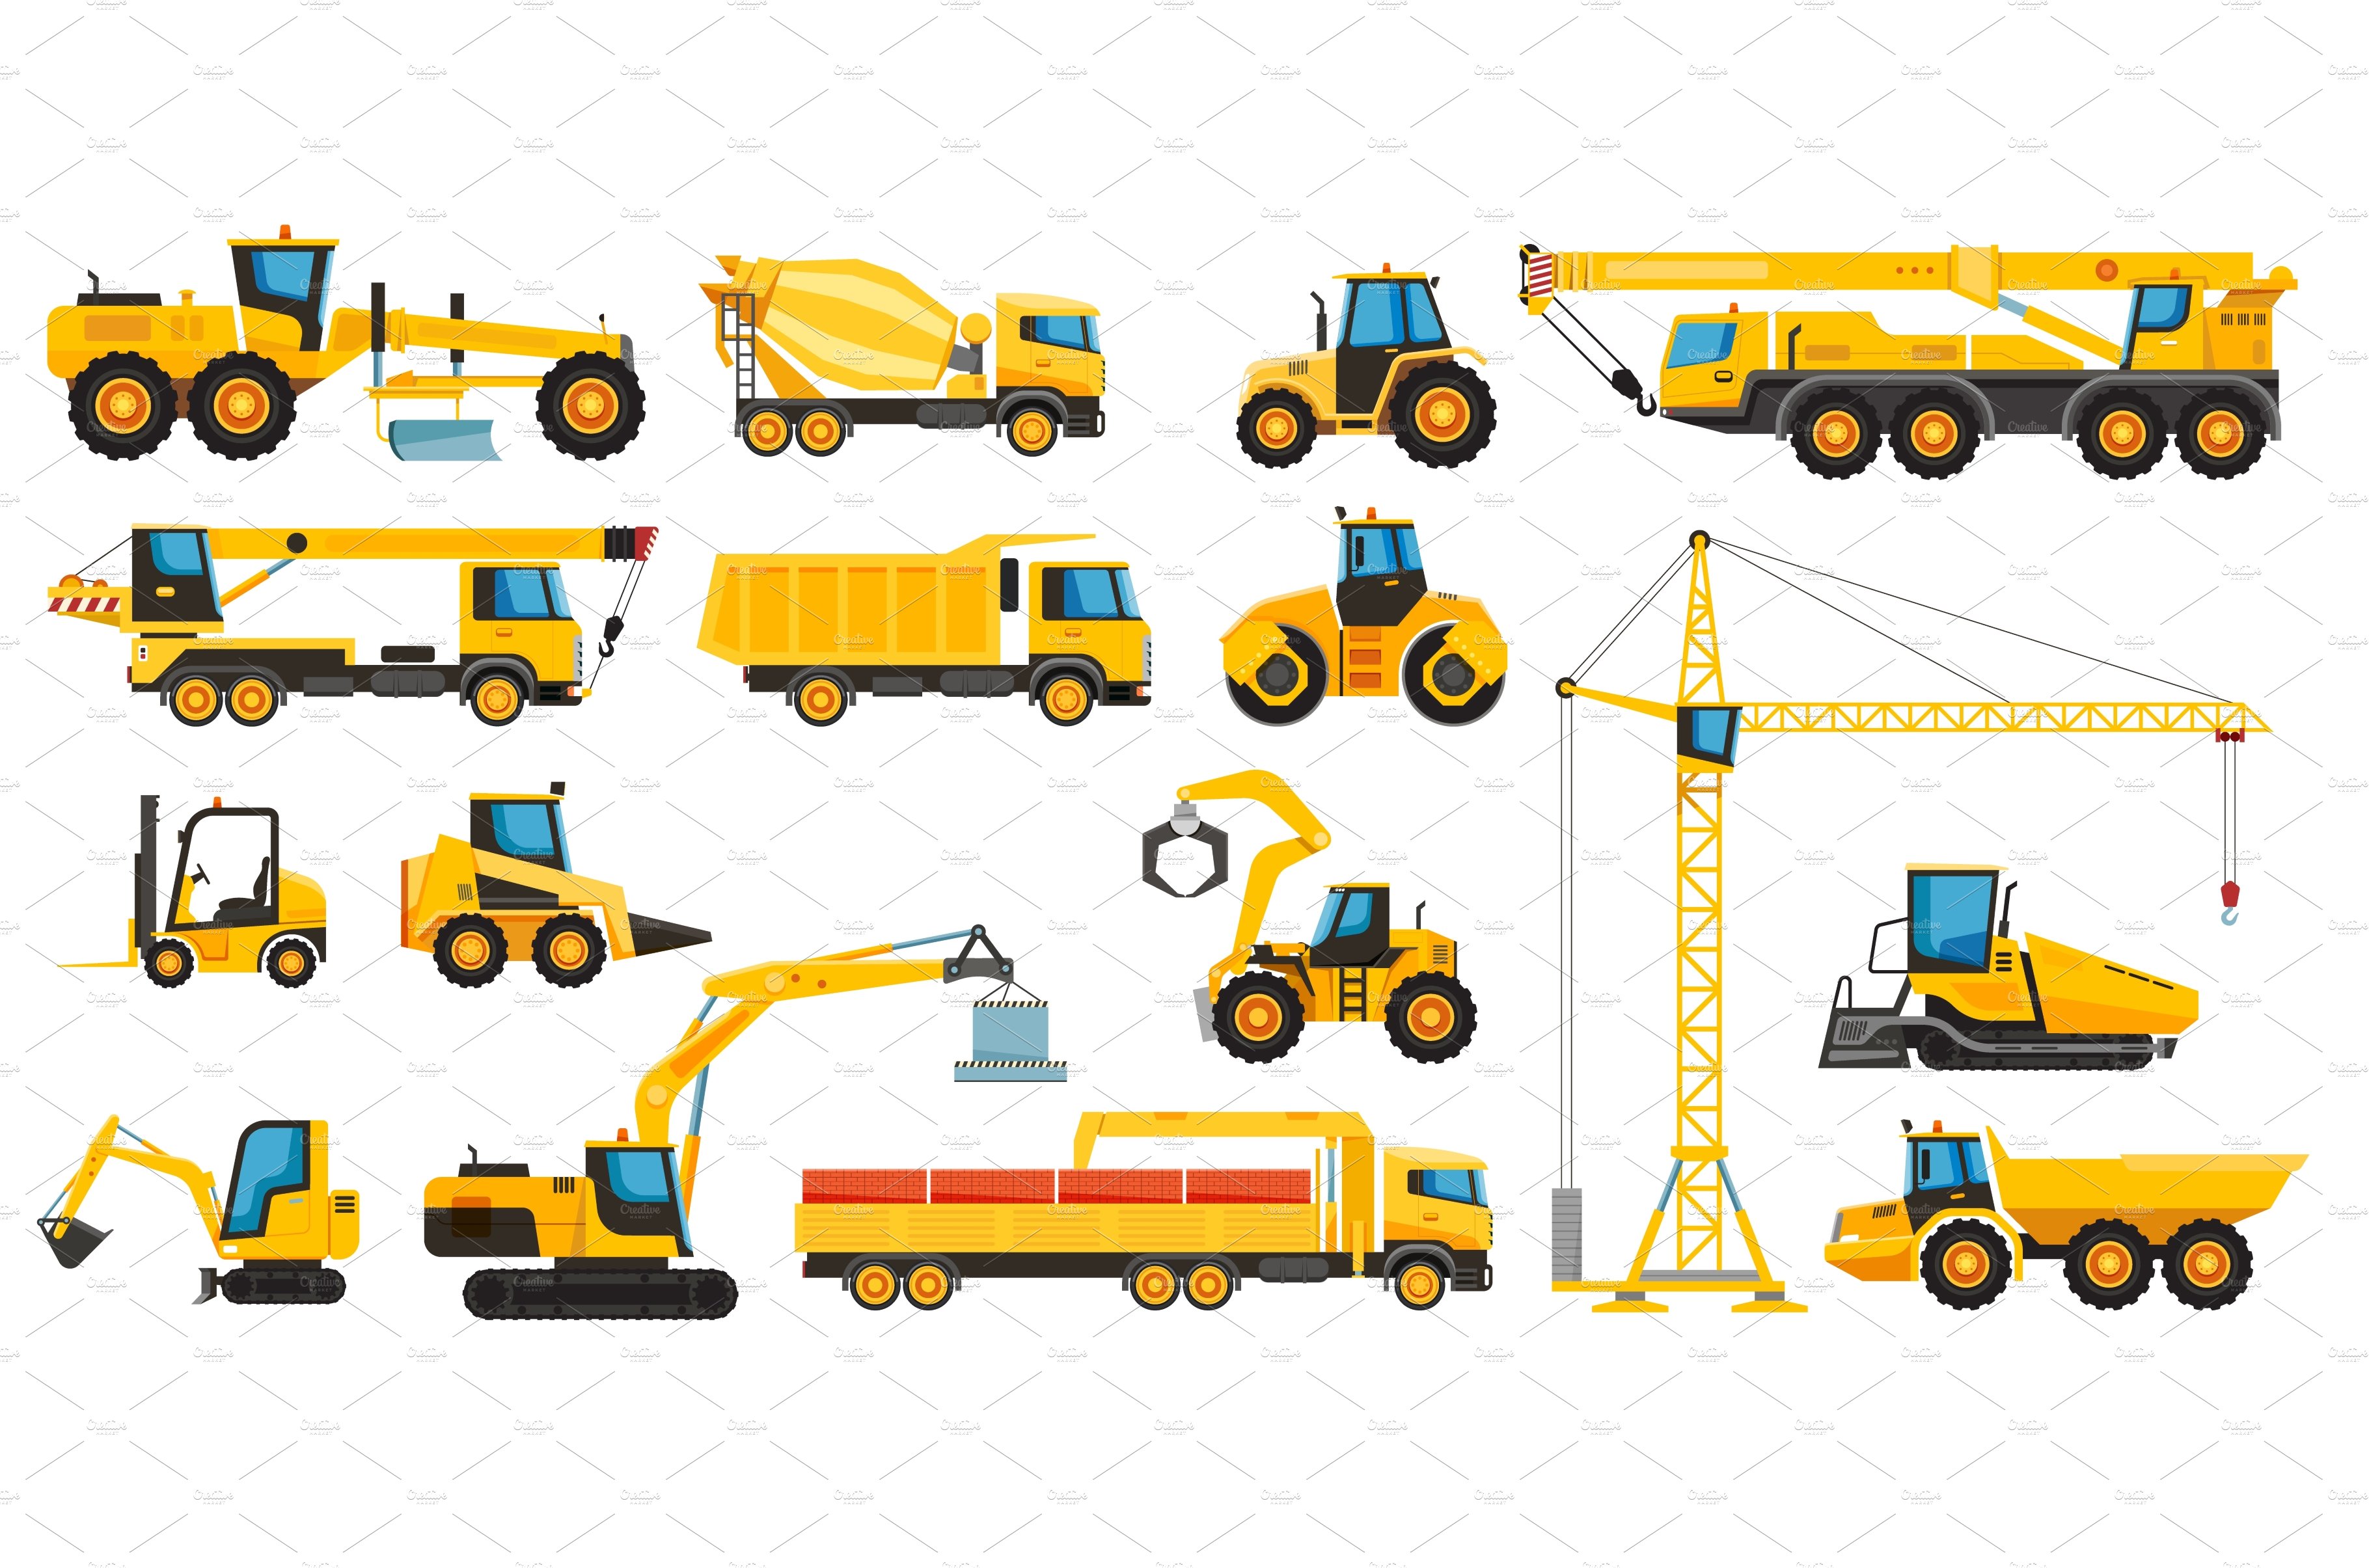 Construction heavy machinery cover image.